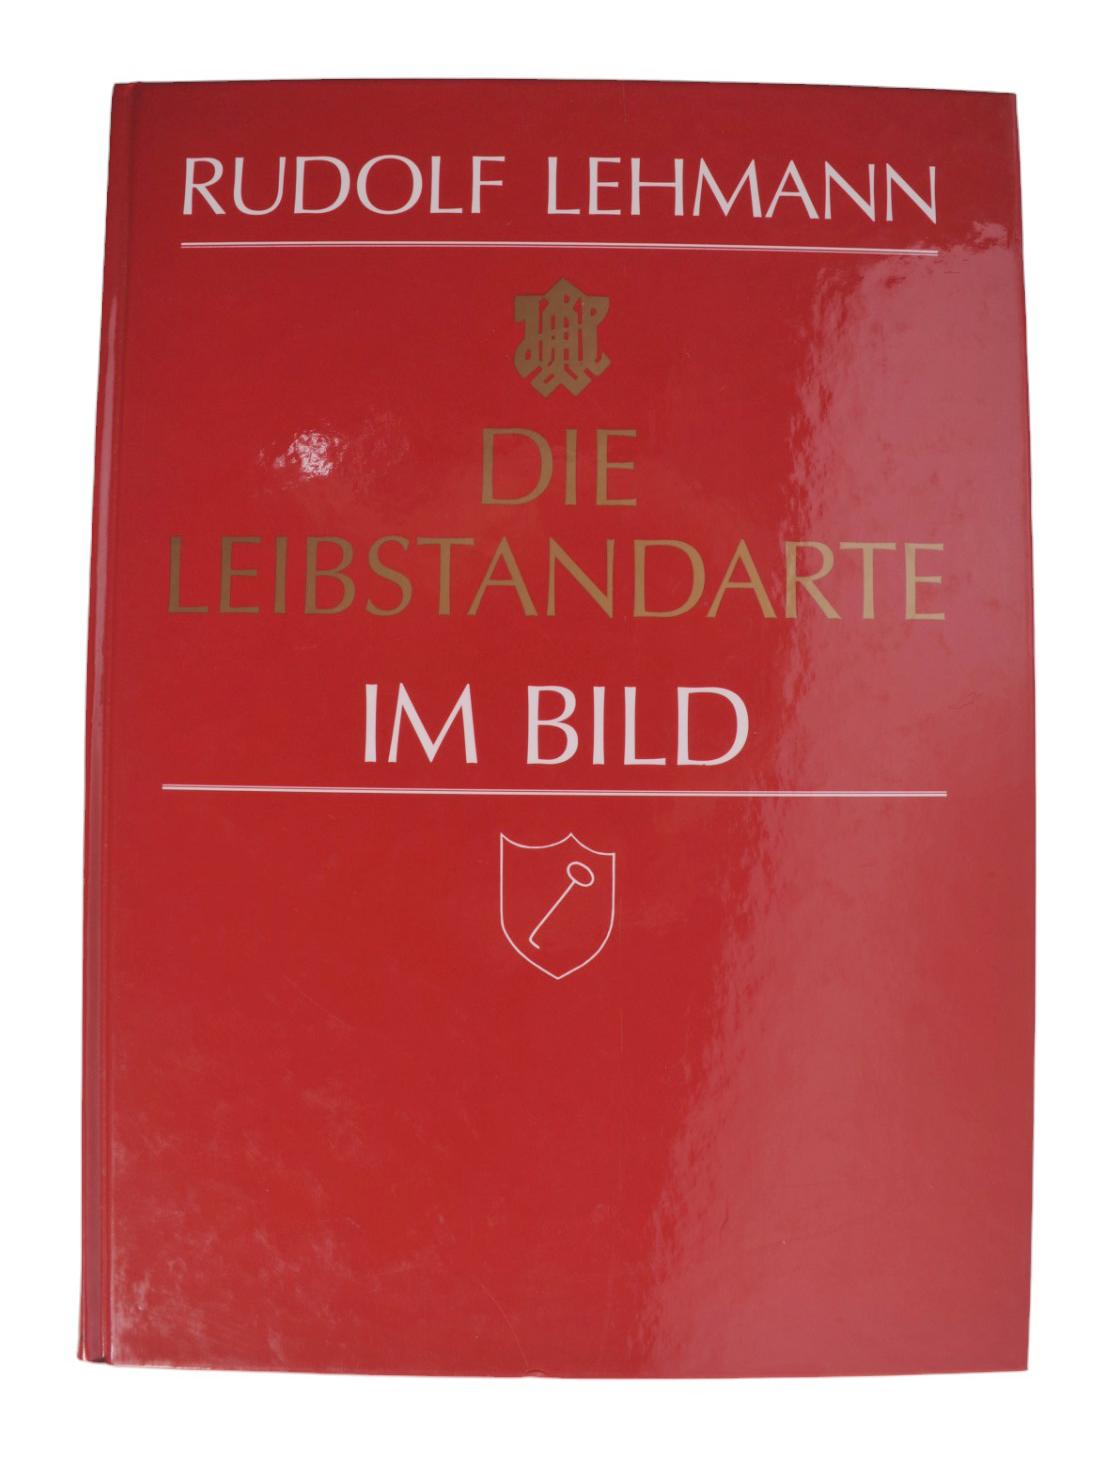 Two Collector Reference Books on German Military Units in German (ARD)